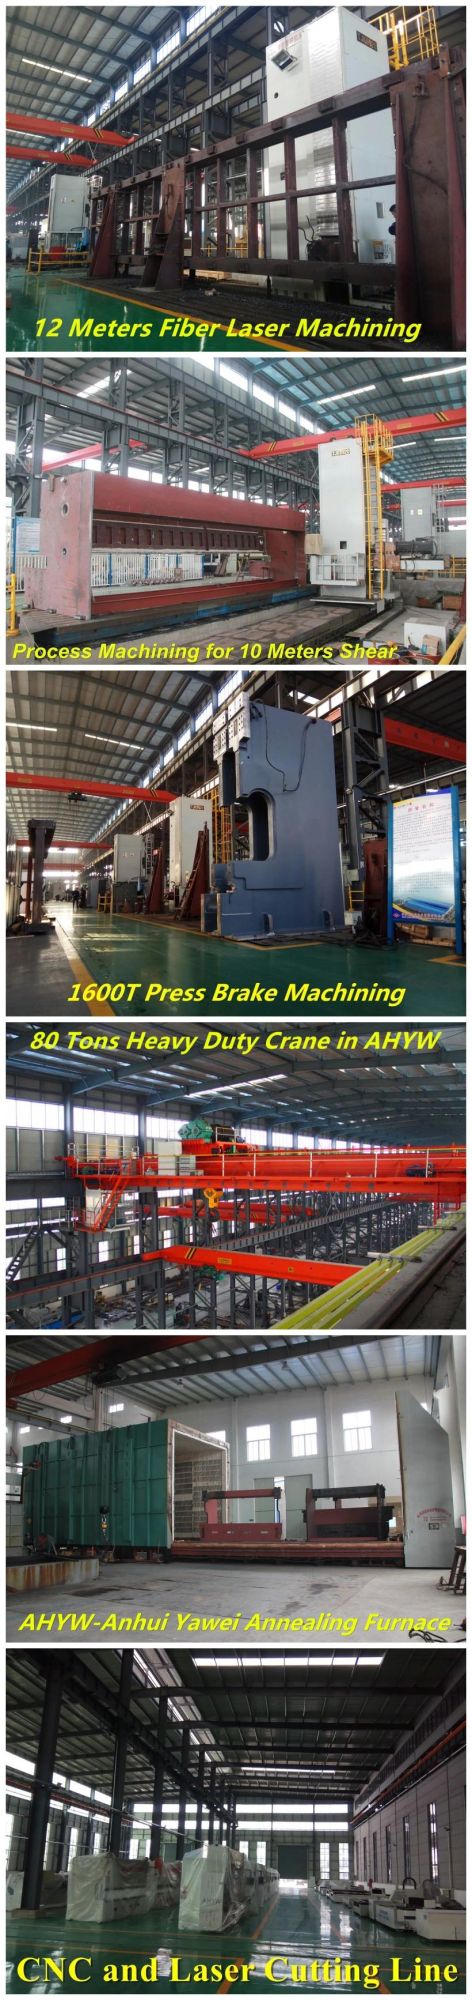 Tandem CNC Press Brake with Twins Machine on Double Bending Length